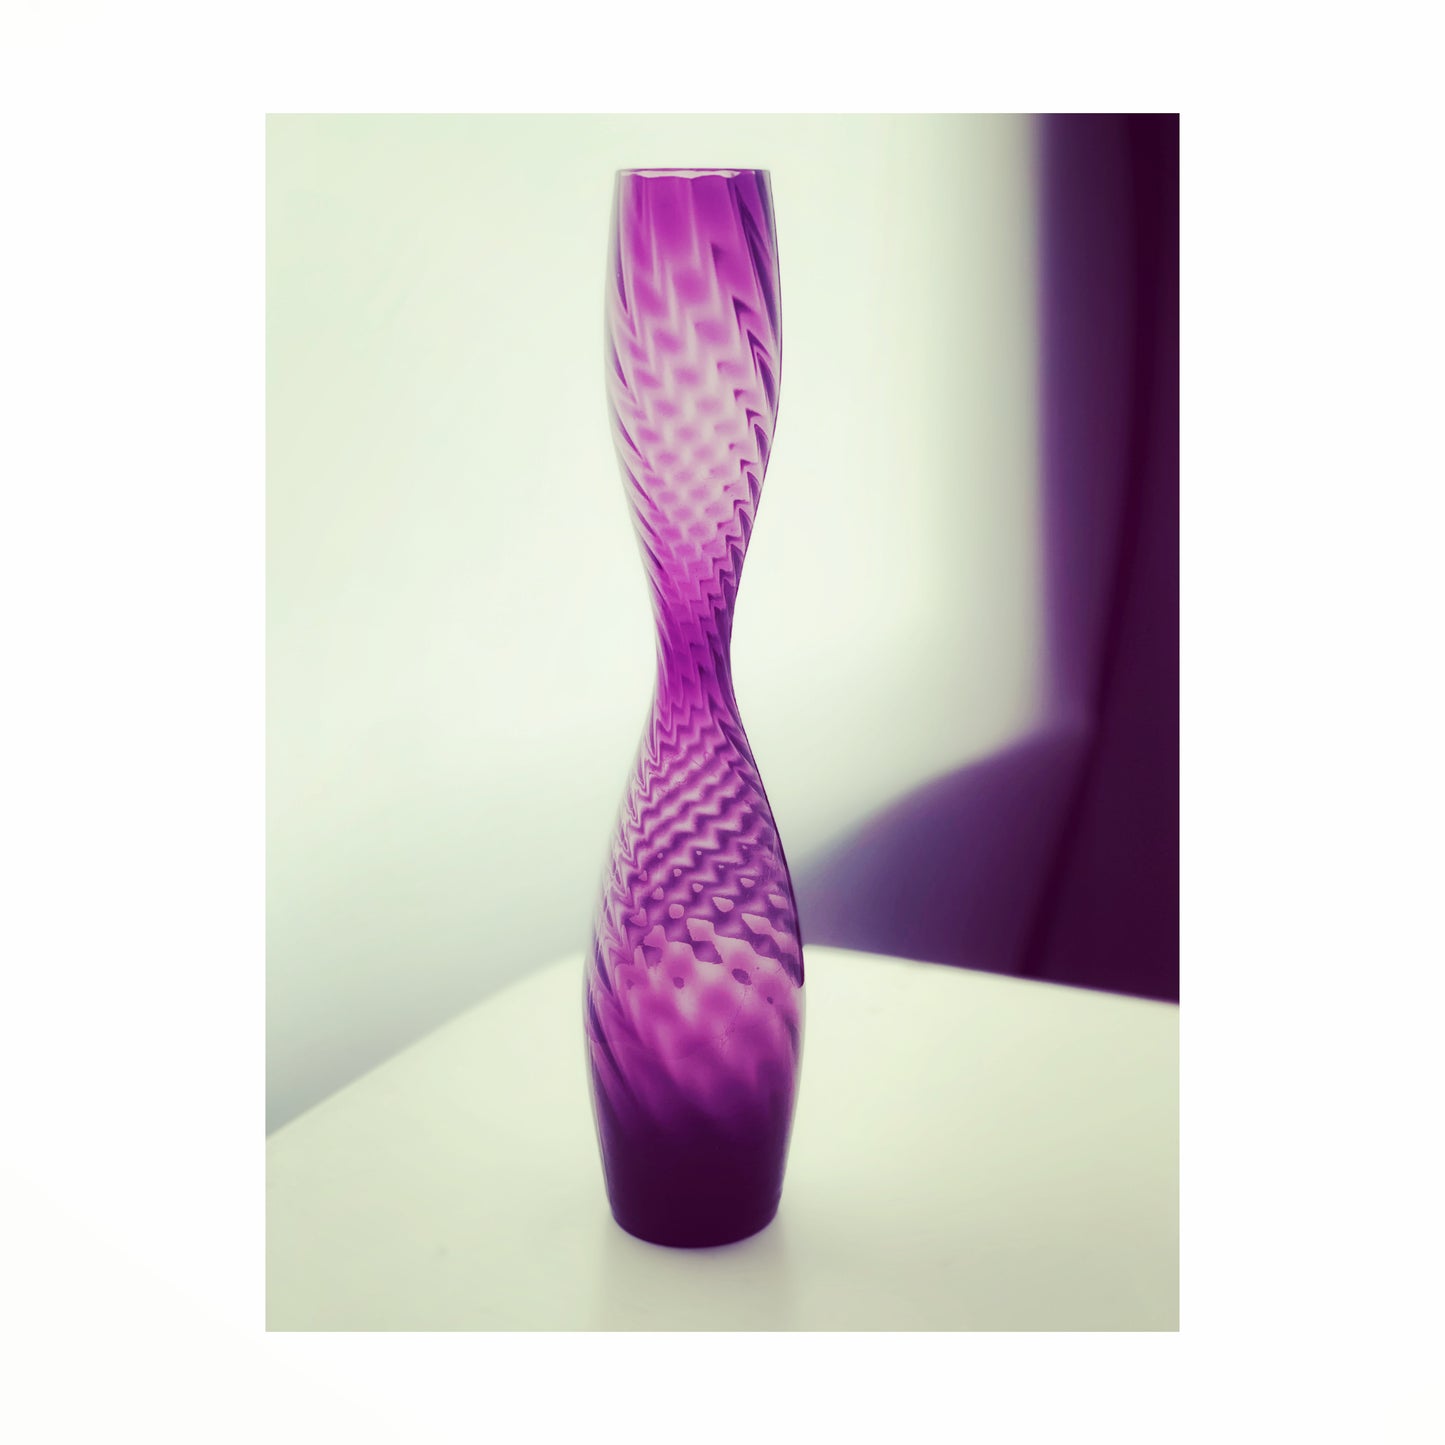 Swirls and curves - 1970s Vase - beautiful plum agate colour